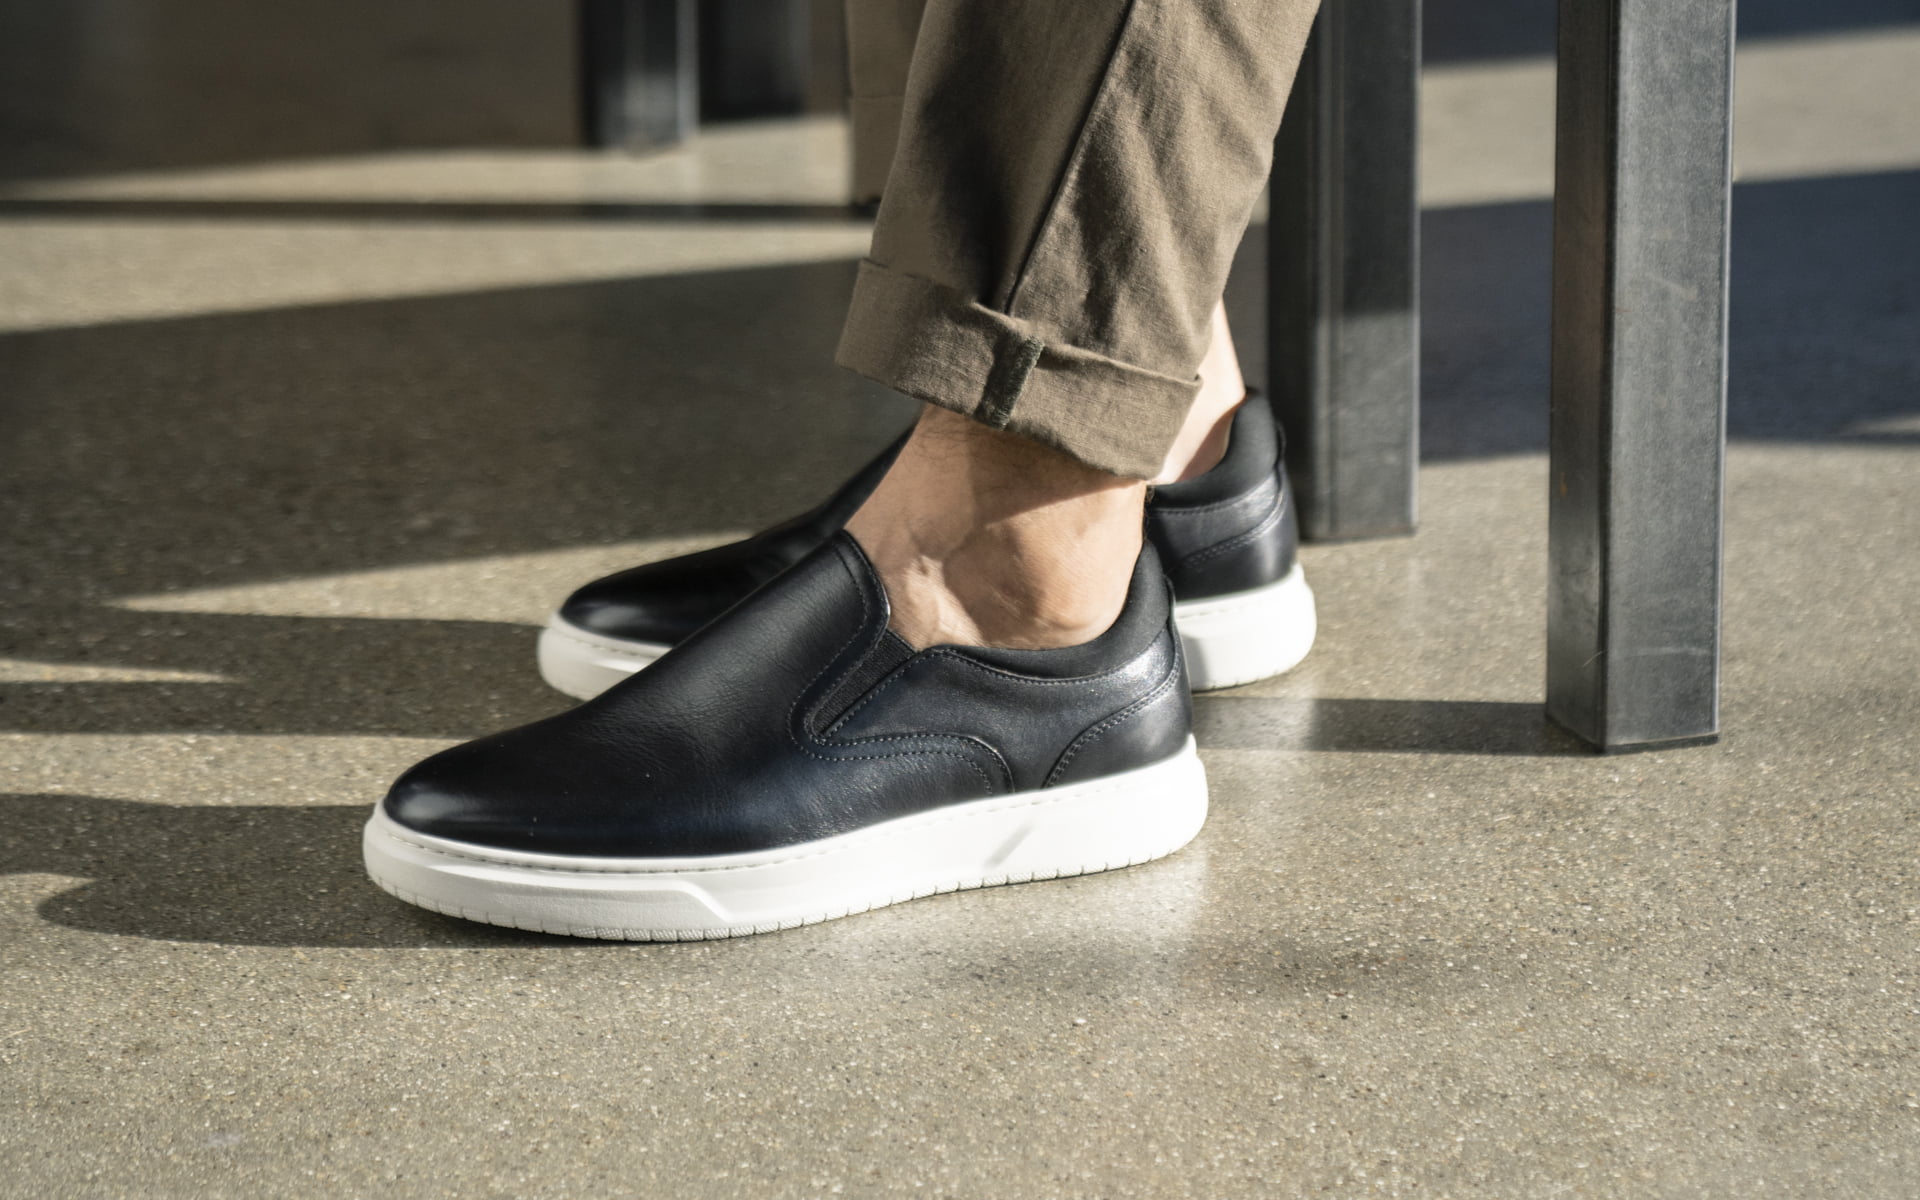 Click to shop the Florshiem Premier collection. Image features the Premier Slip On Sneaker in black.